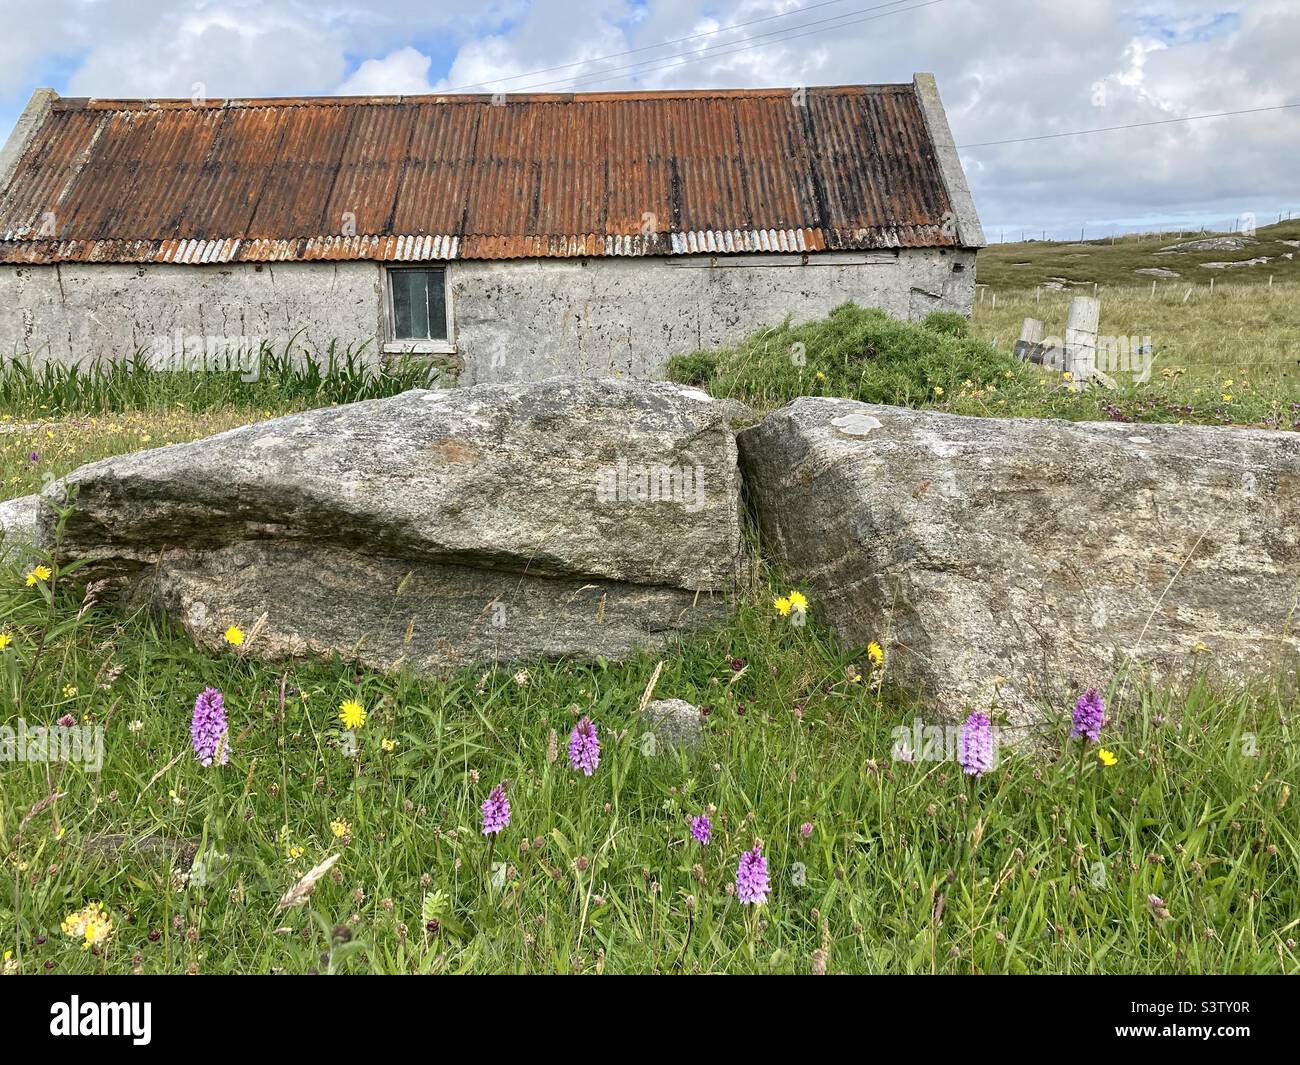 Wild orchids and flowers growing next to rocks and an old building with crinkled tin, rusty roof, on the Isle of Barra, Outer Hebrides, Scotland Stock Photo